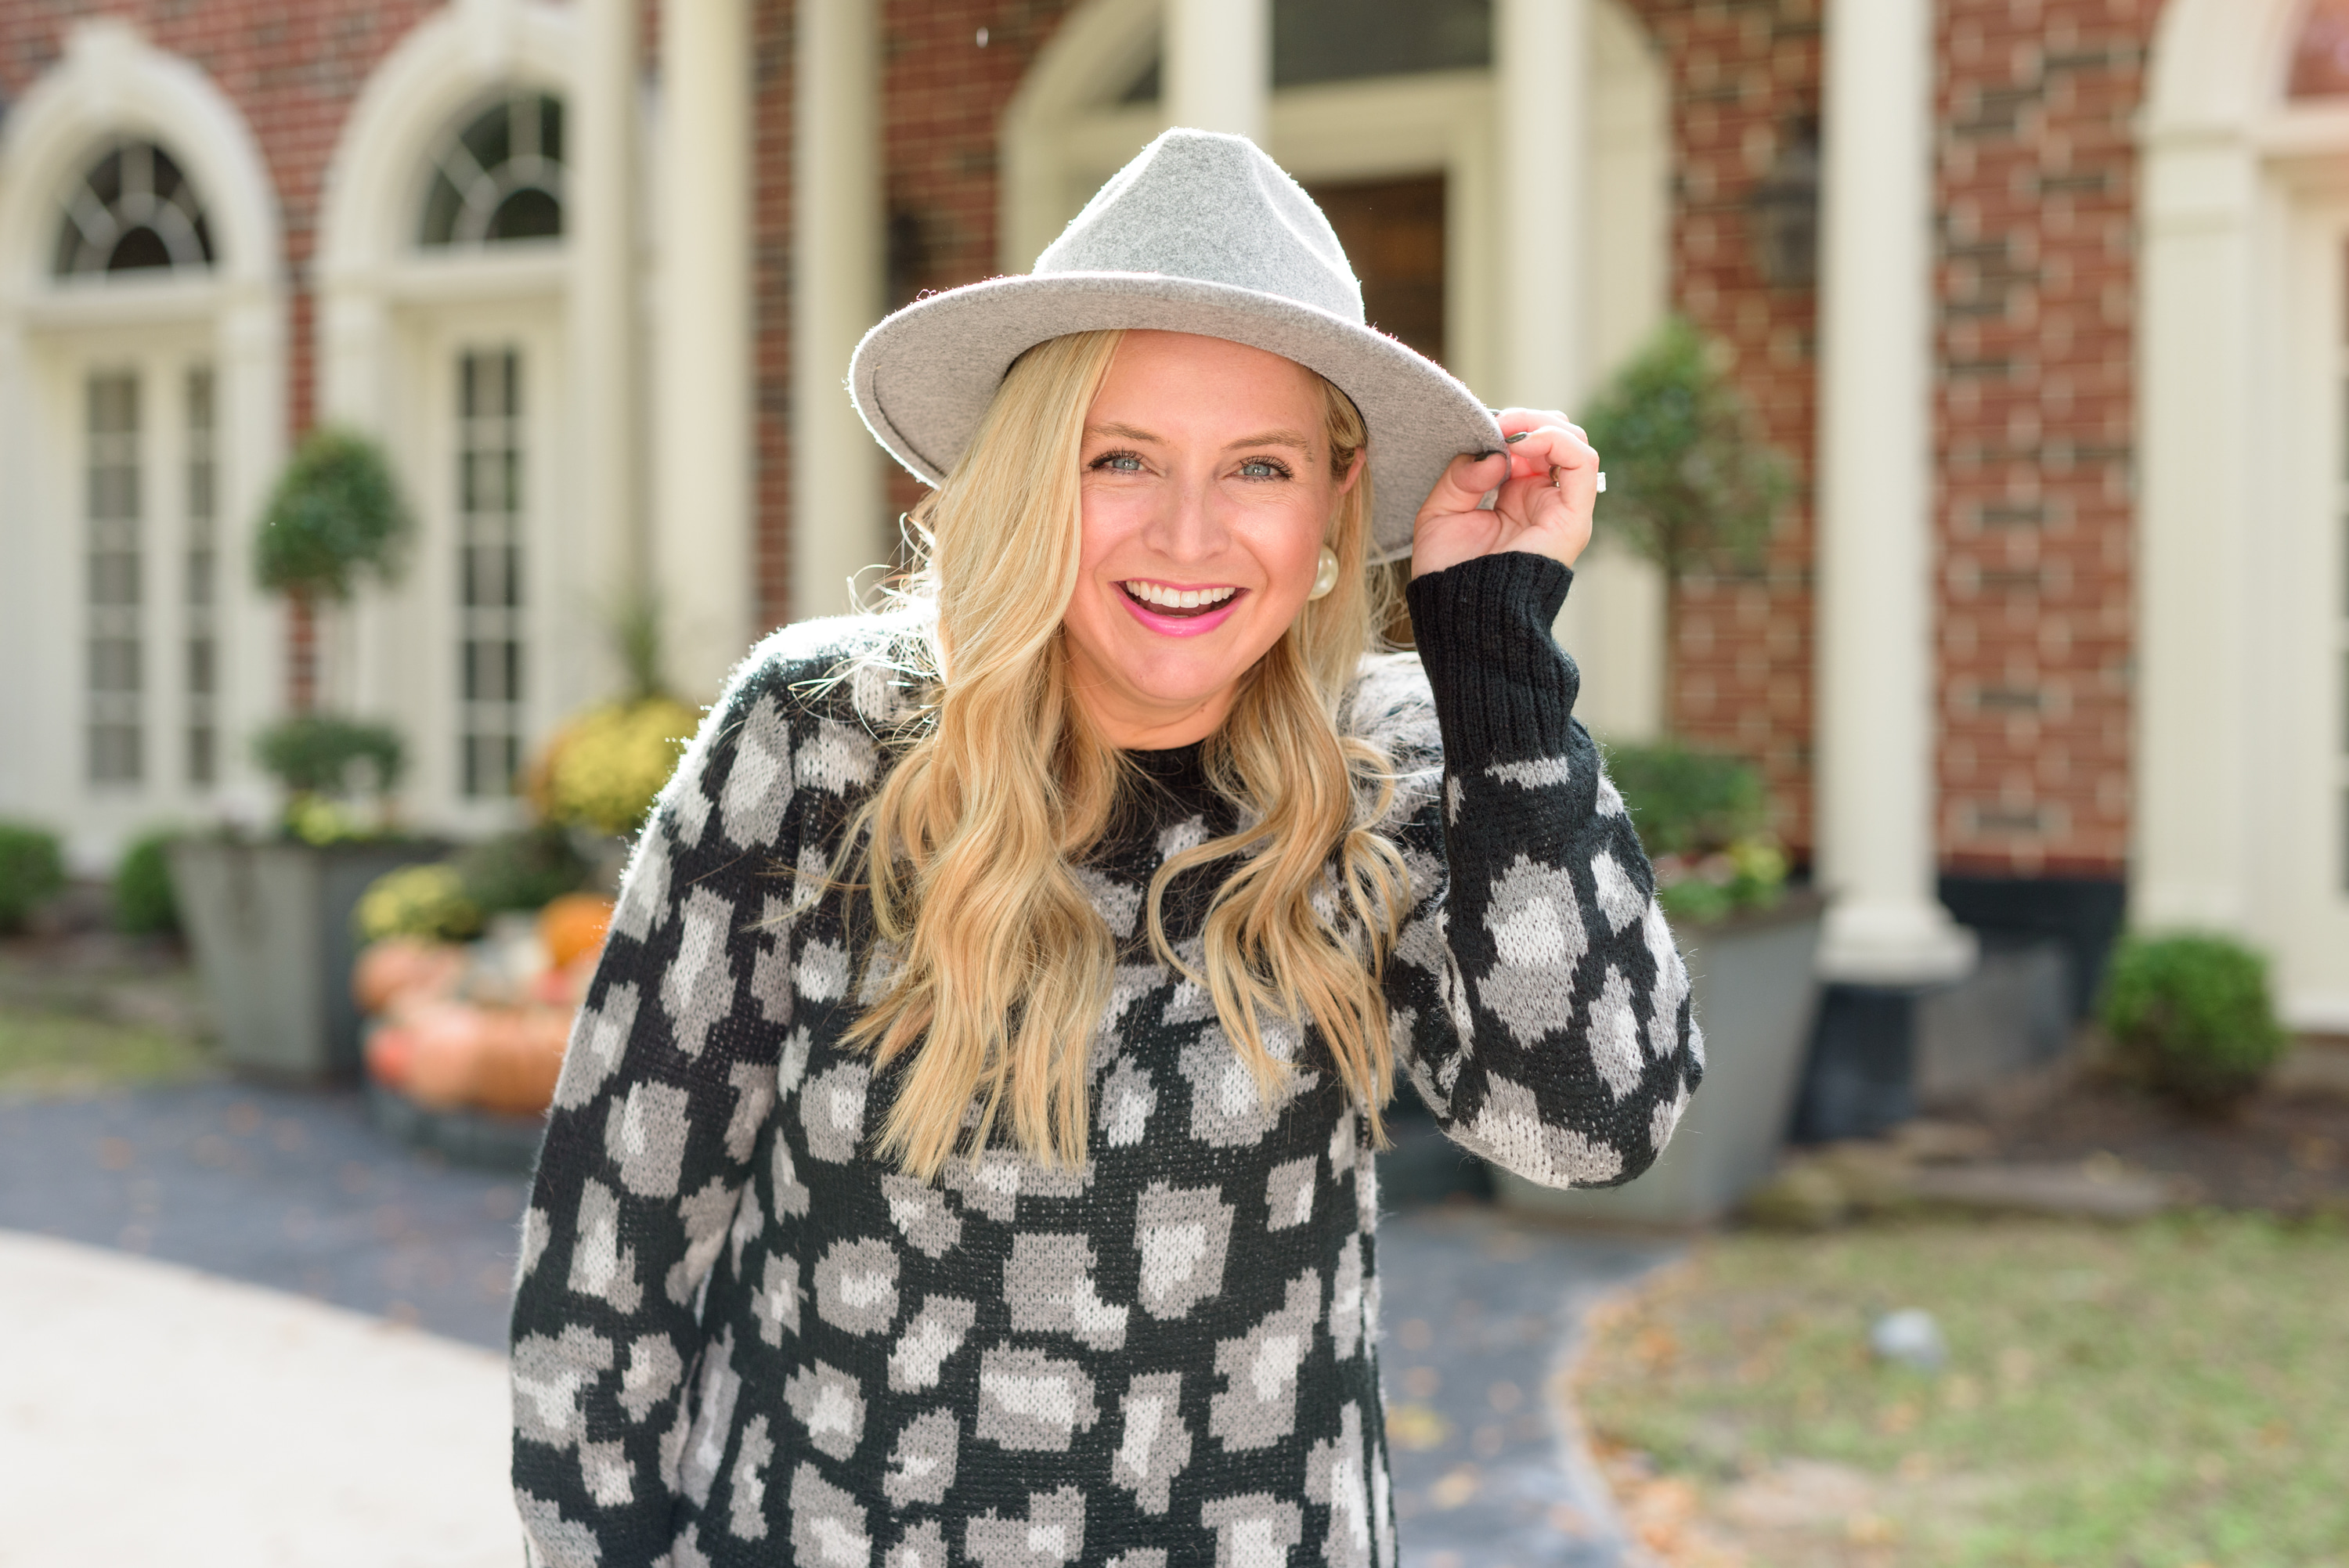 Fall Clothing by popular Houston fashion blog, Fancy Ashley: image of a woman wearing a Walmart Scoop Women's Leopard Print Sweater Dress, Walmart Scoop Alexandra Women’s Over the Knee Heeled Boots, and Walmart Time and Tru Women's Chenille Fedora with Braided Trim.